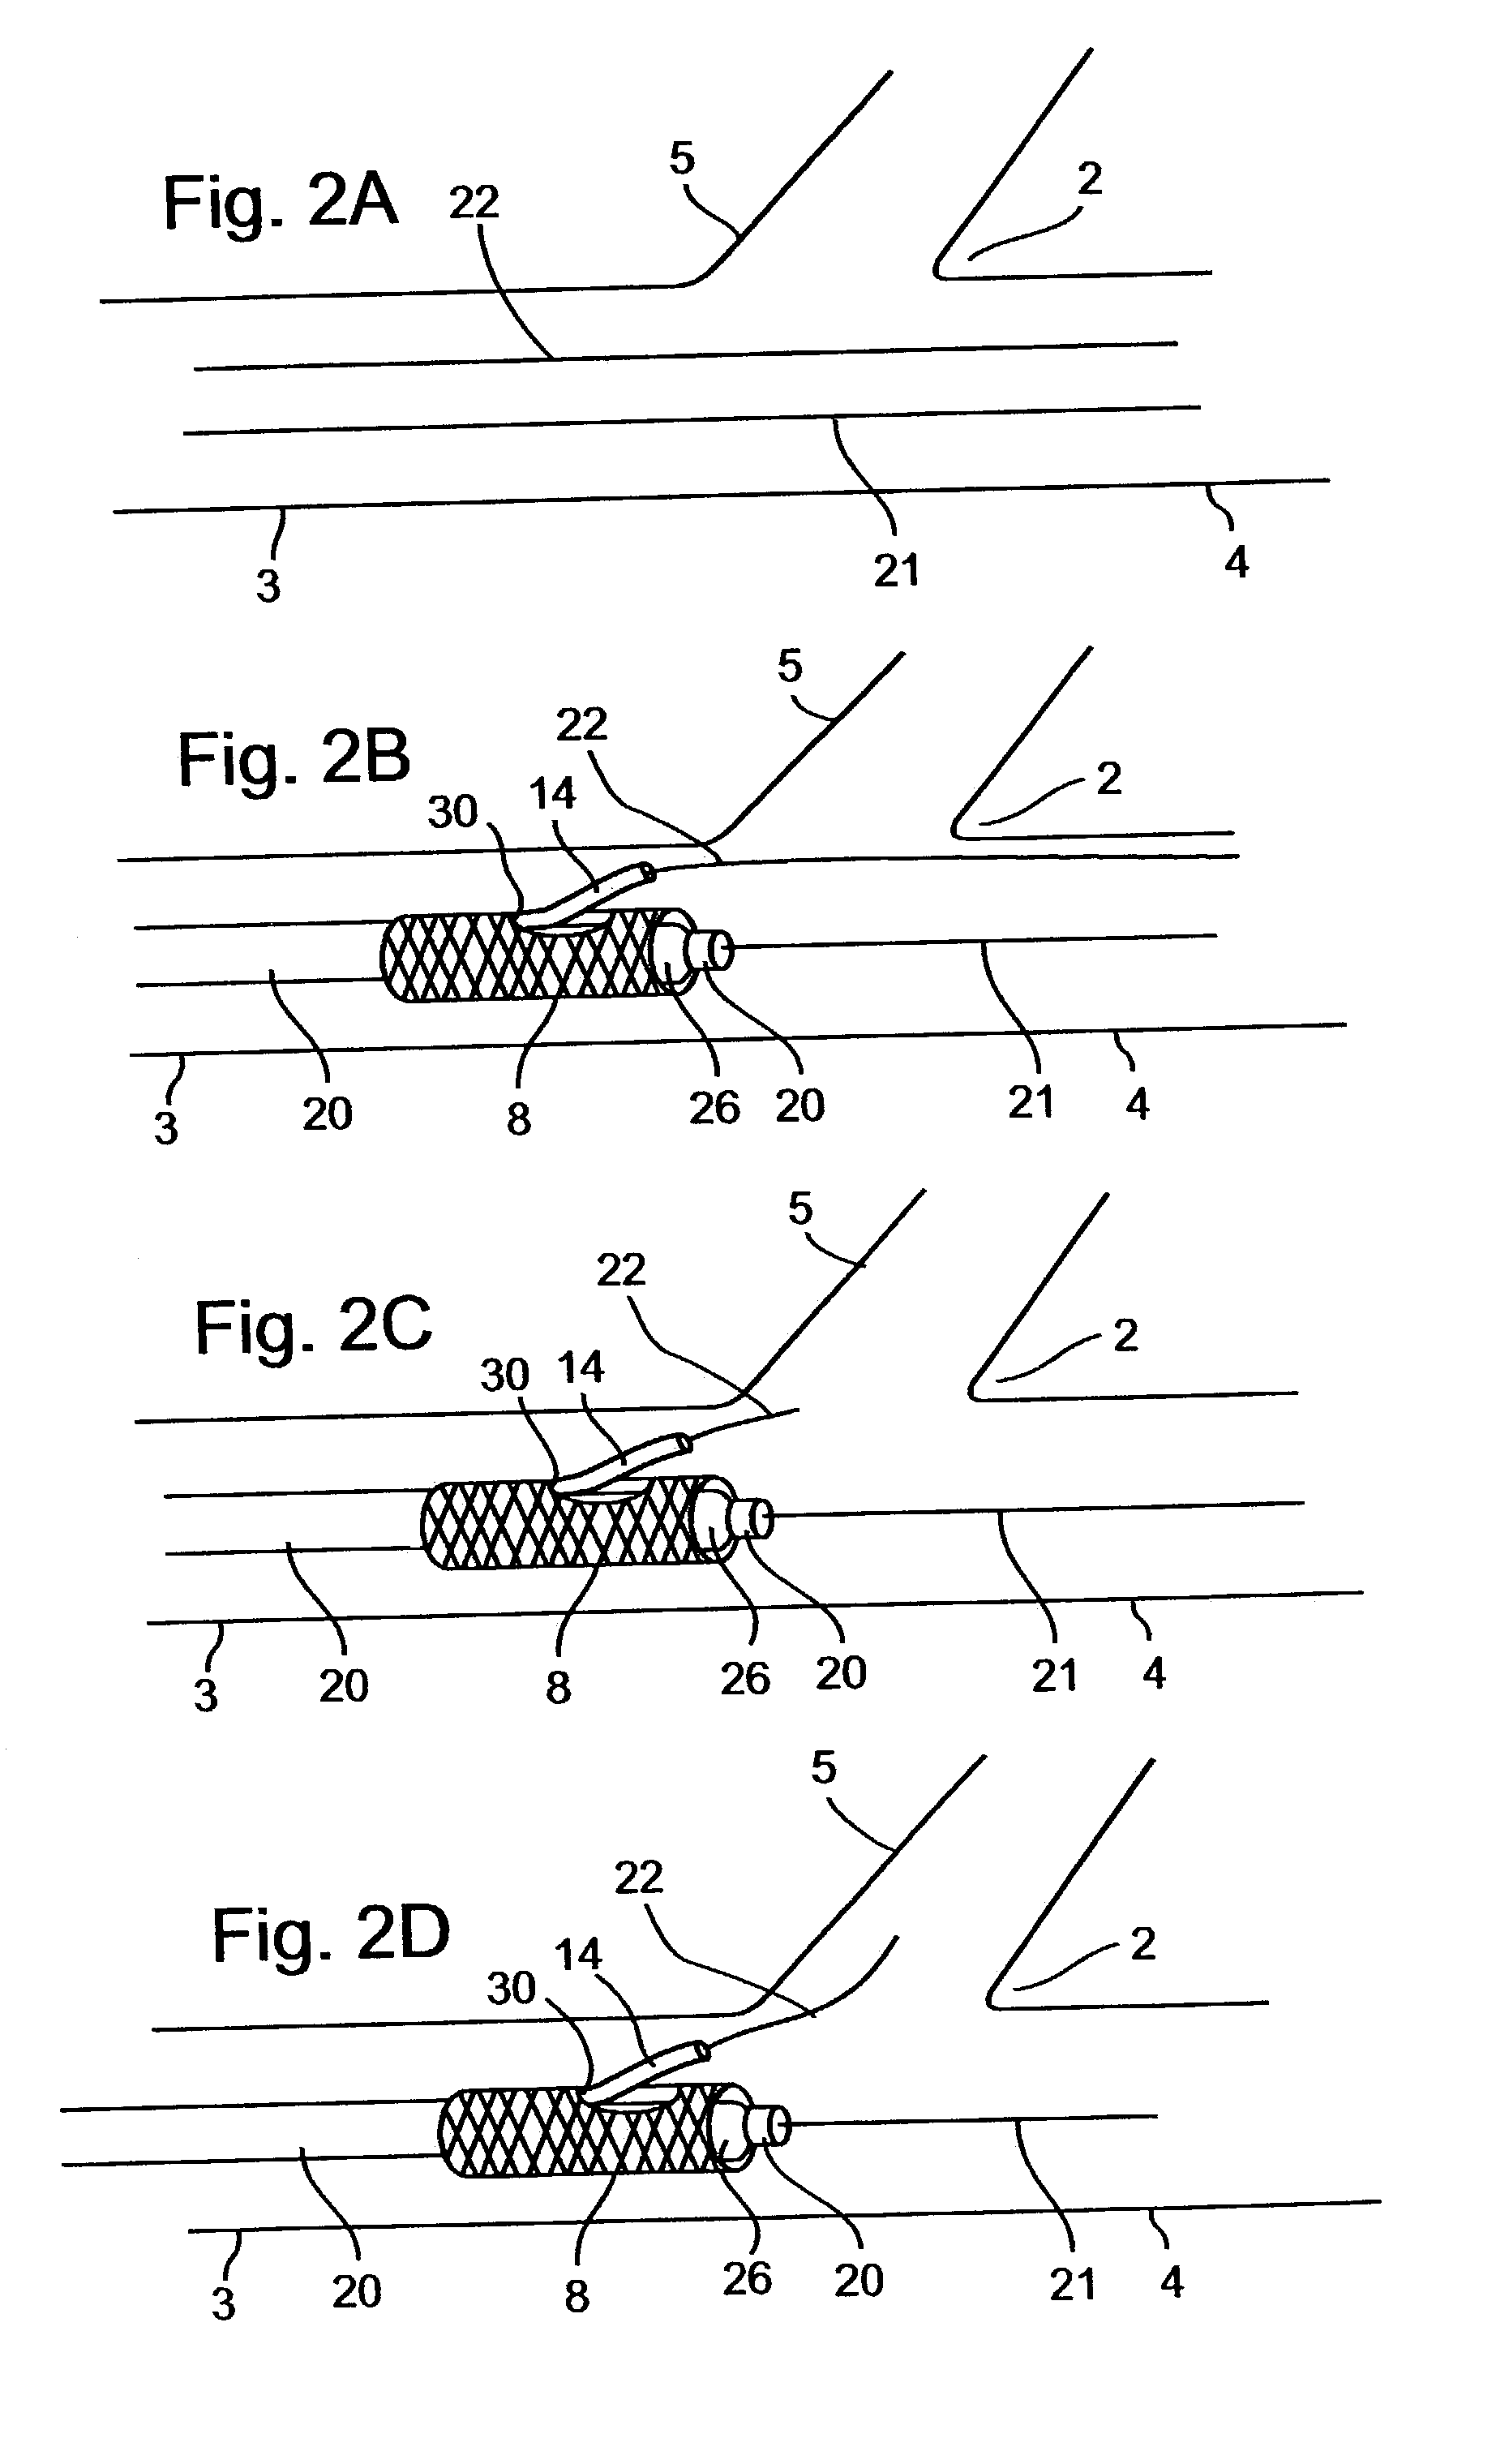 Methods for deploying stents in bifurcations